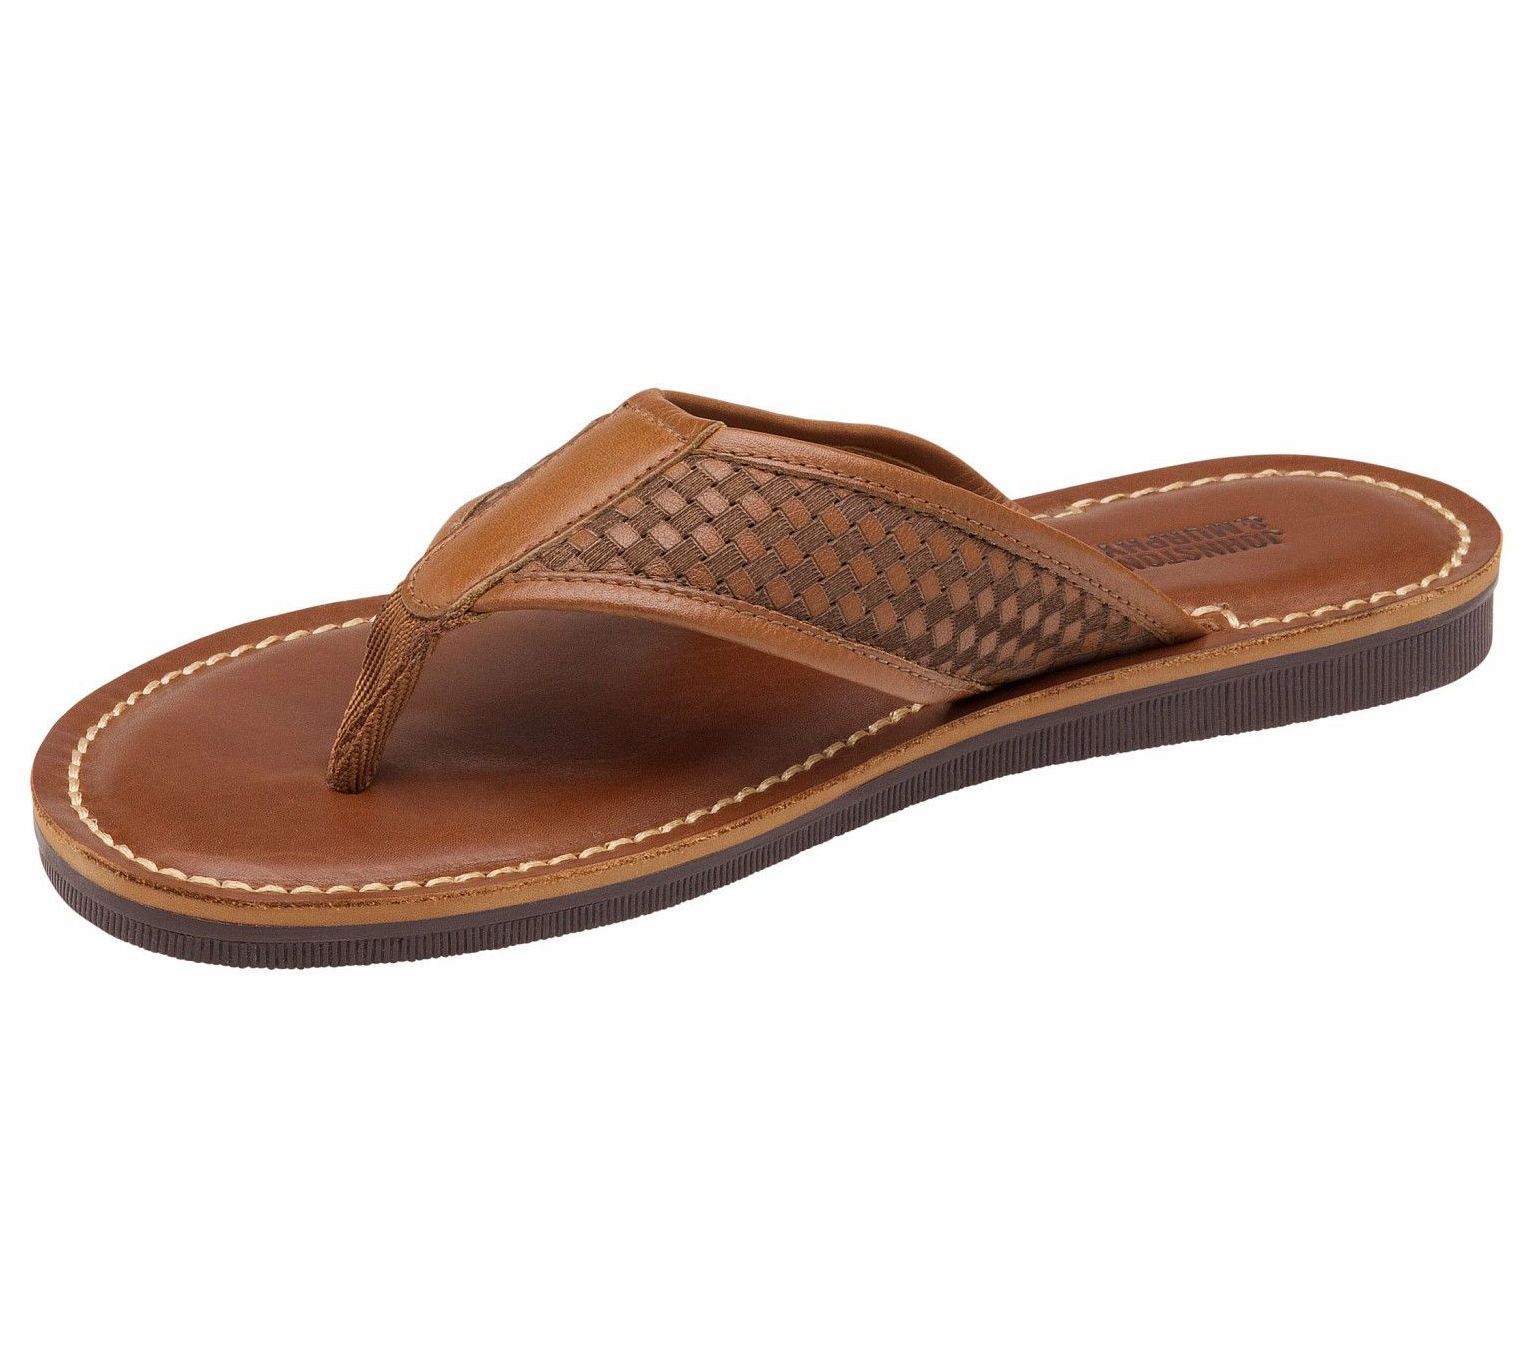 U-MAC Mens Flip Flops Thongs Sandals Fashion Outdoor Casual Personalize Exquisite Leather Shoes 